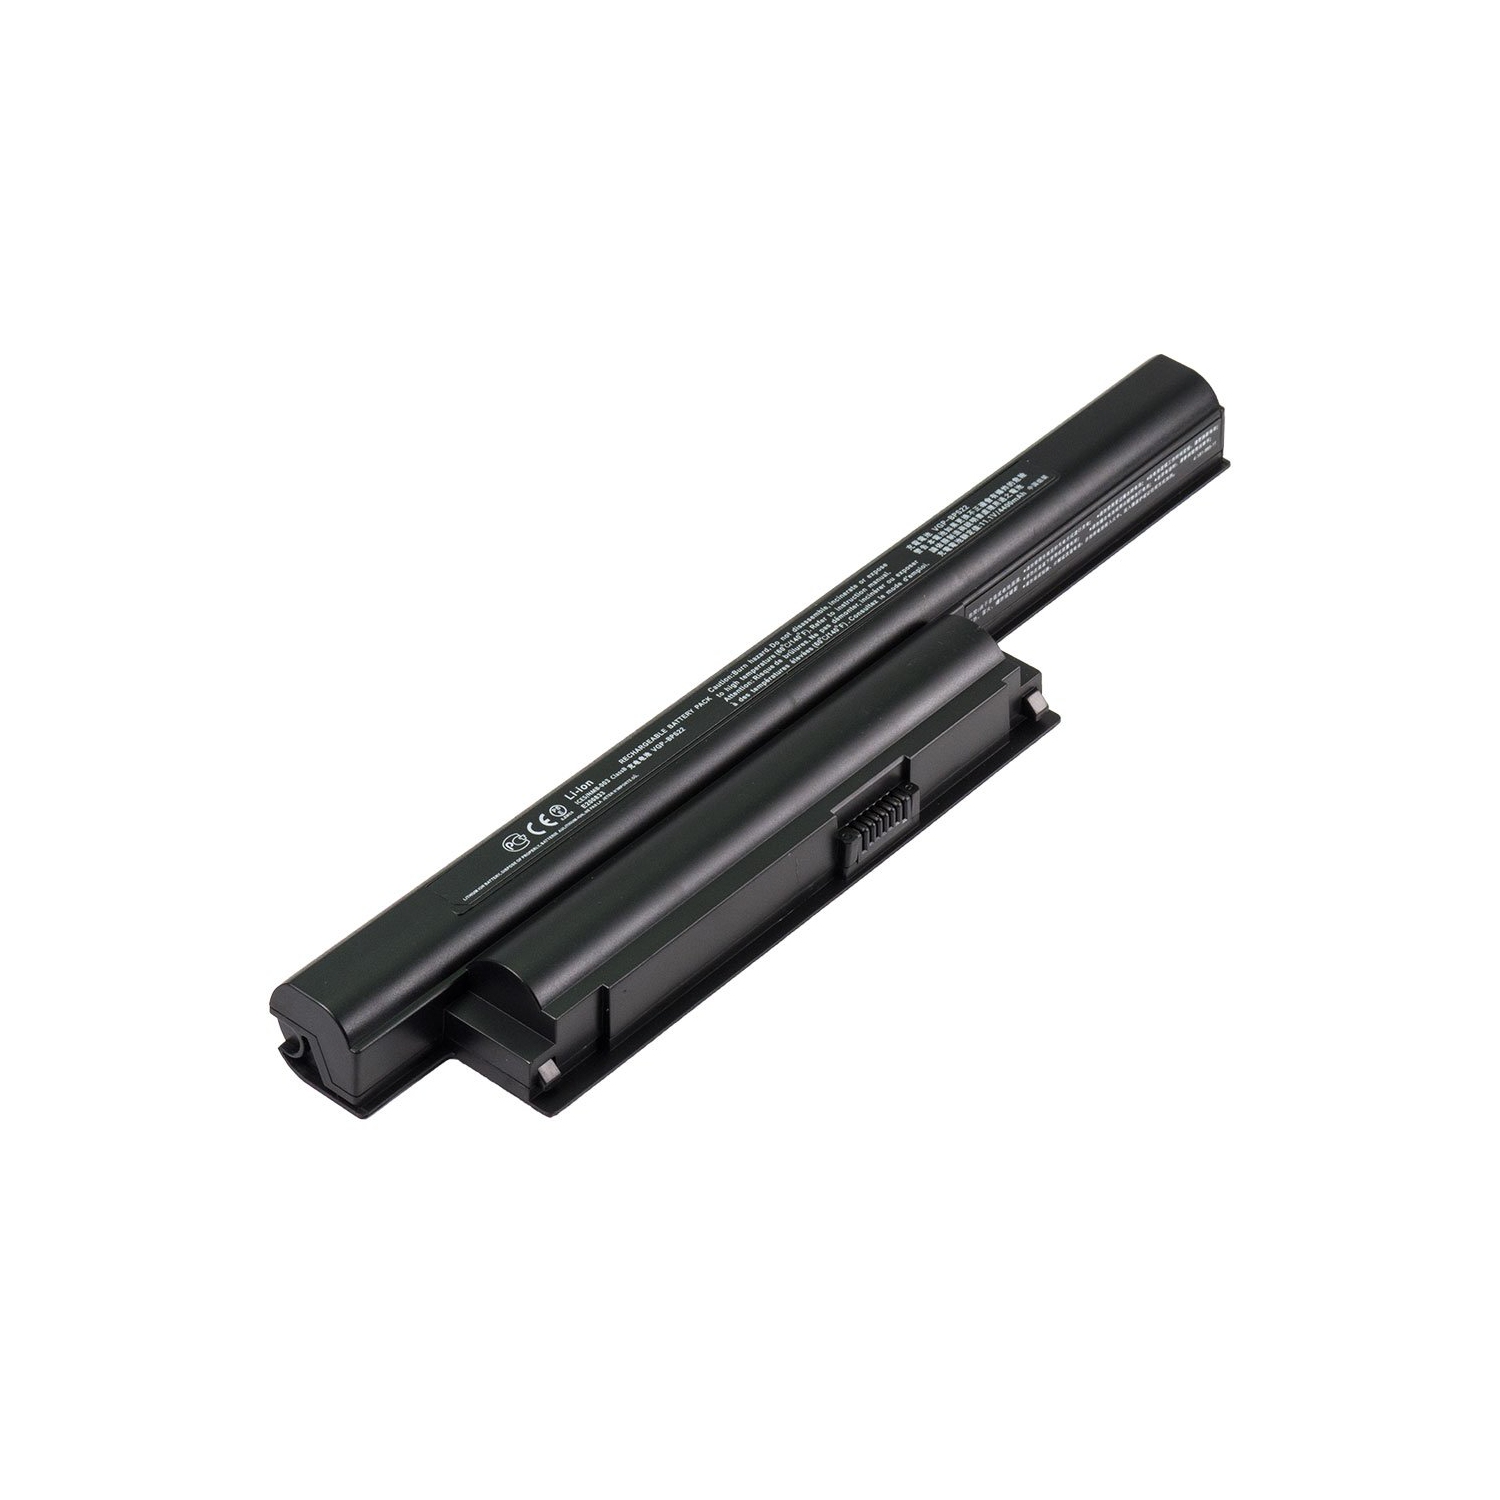 Laptop Battery Replacement for Sony VAIO VPC-EA15FA/P, VGP-BPL22, VGP-BPS22, VGP-BPS22/A, VGP-BPS22A